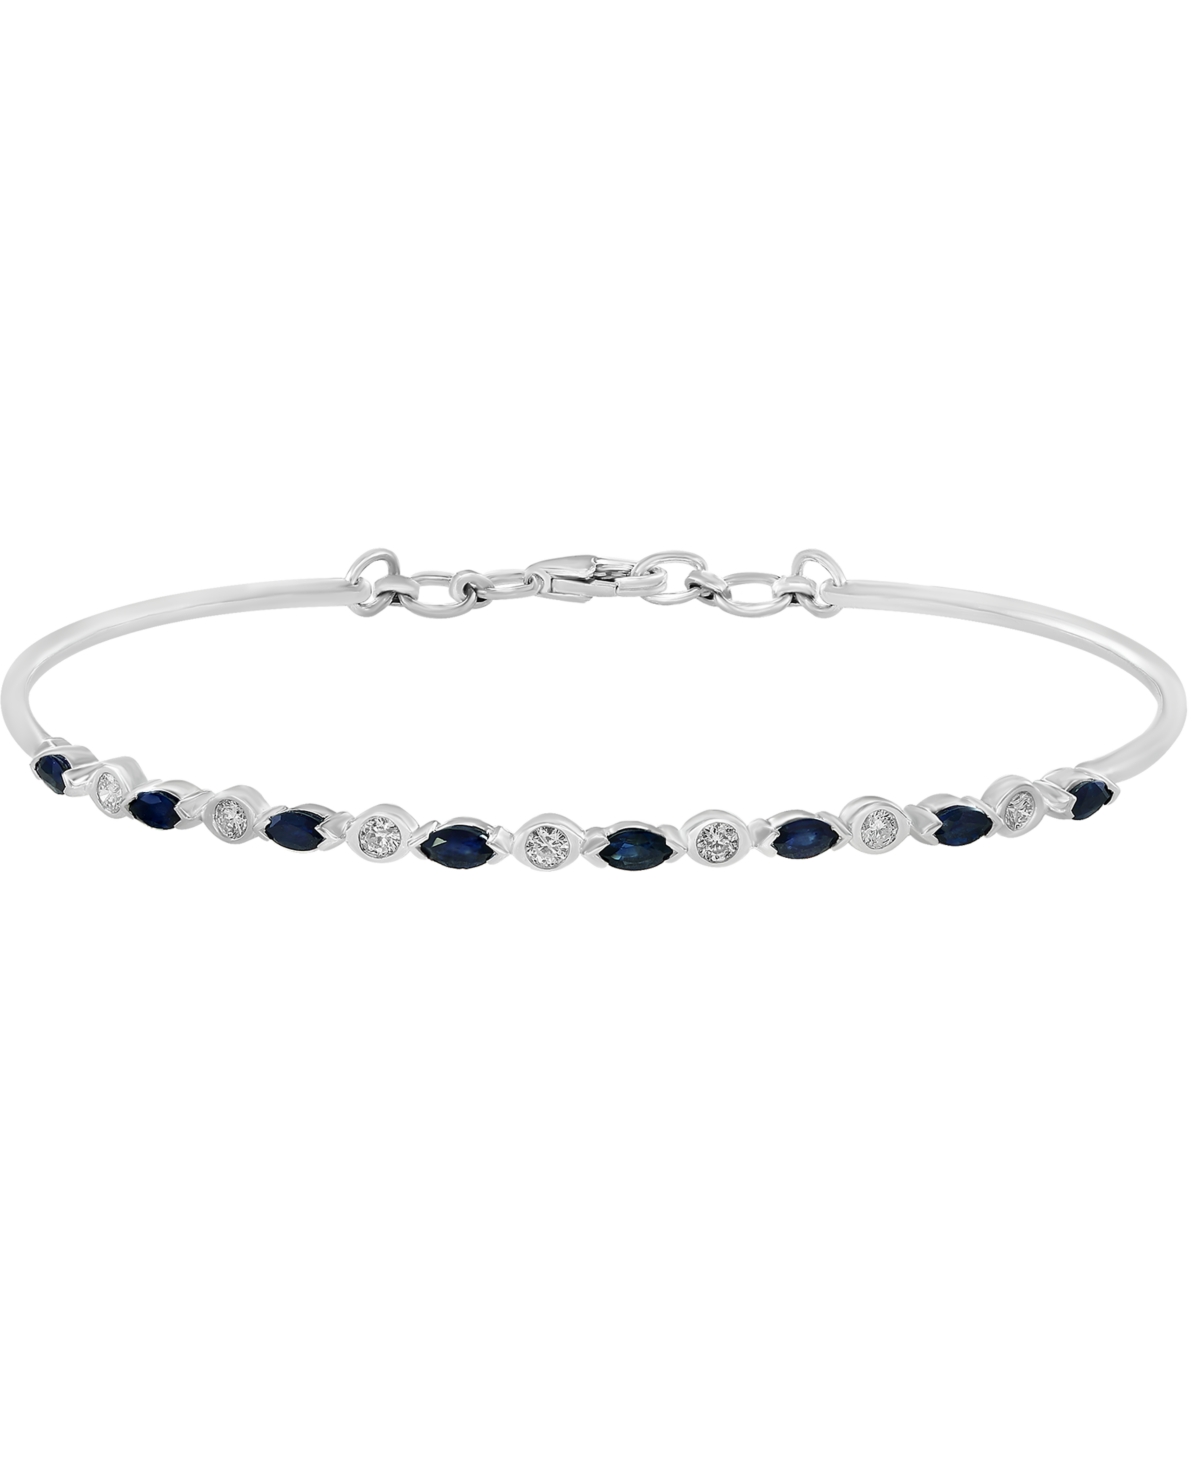 Sapphire (3/4 ct. t.w.) & Diamond (1/5 ct. t.w.) Tennis Bracelet in 14k White Gold (Also in Ruby and Emerald) - Sapphire